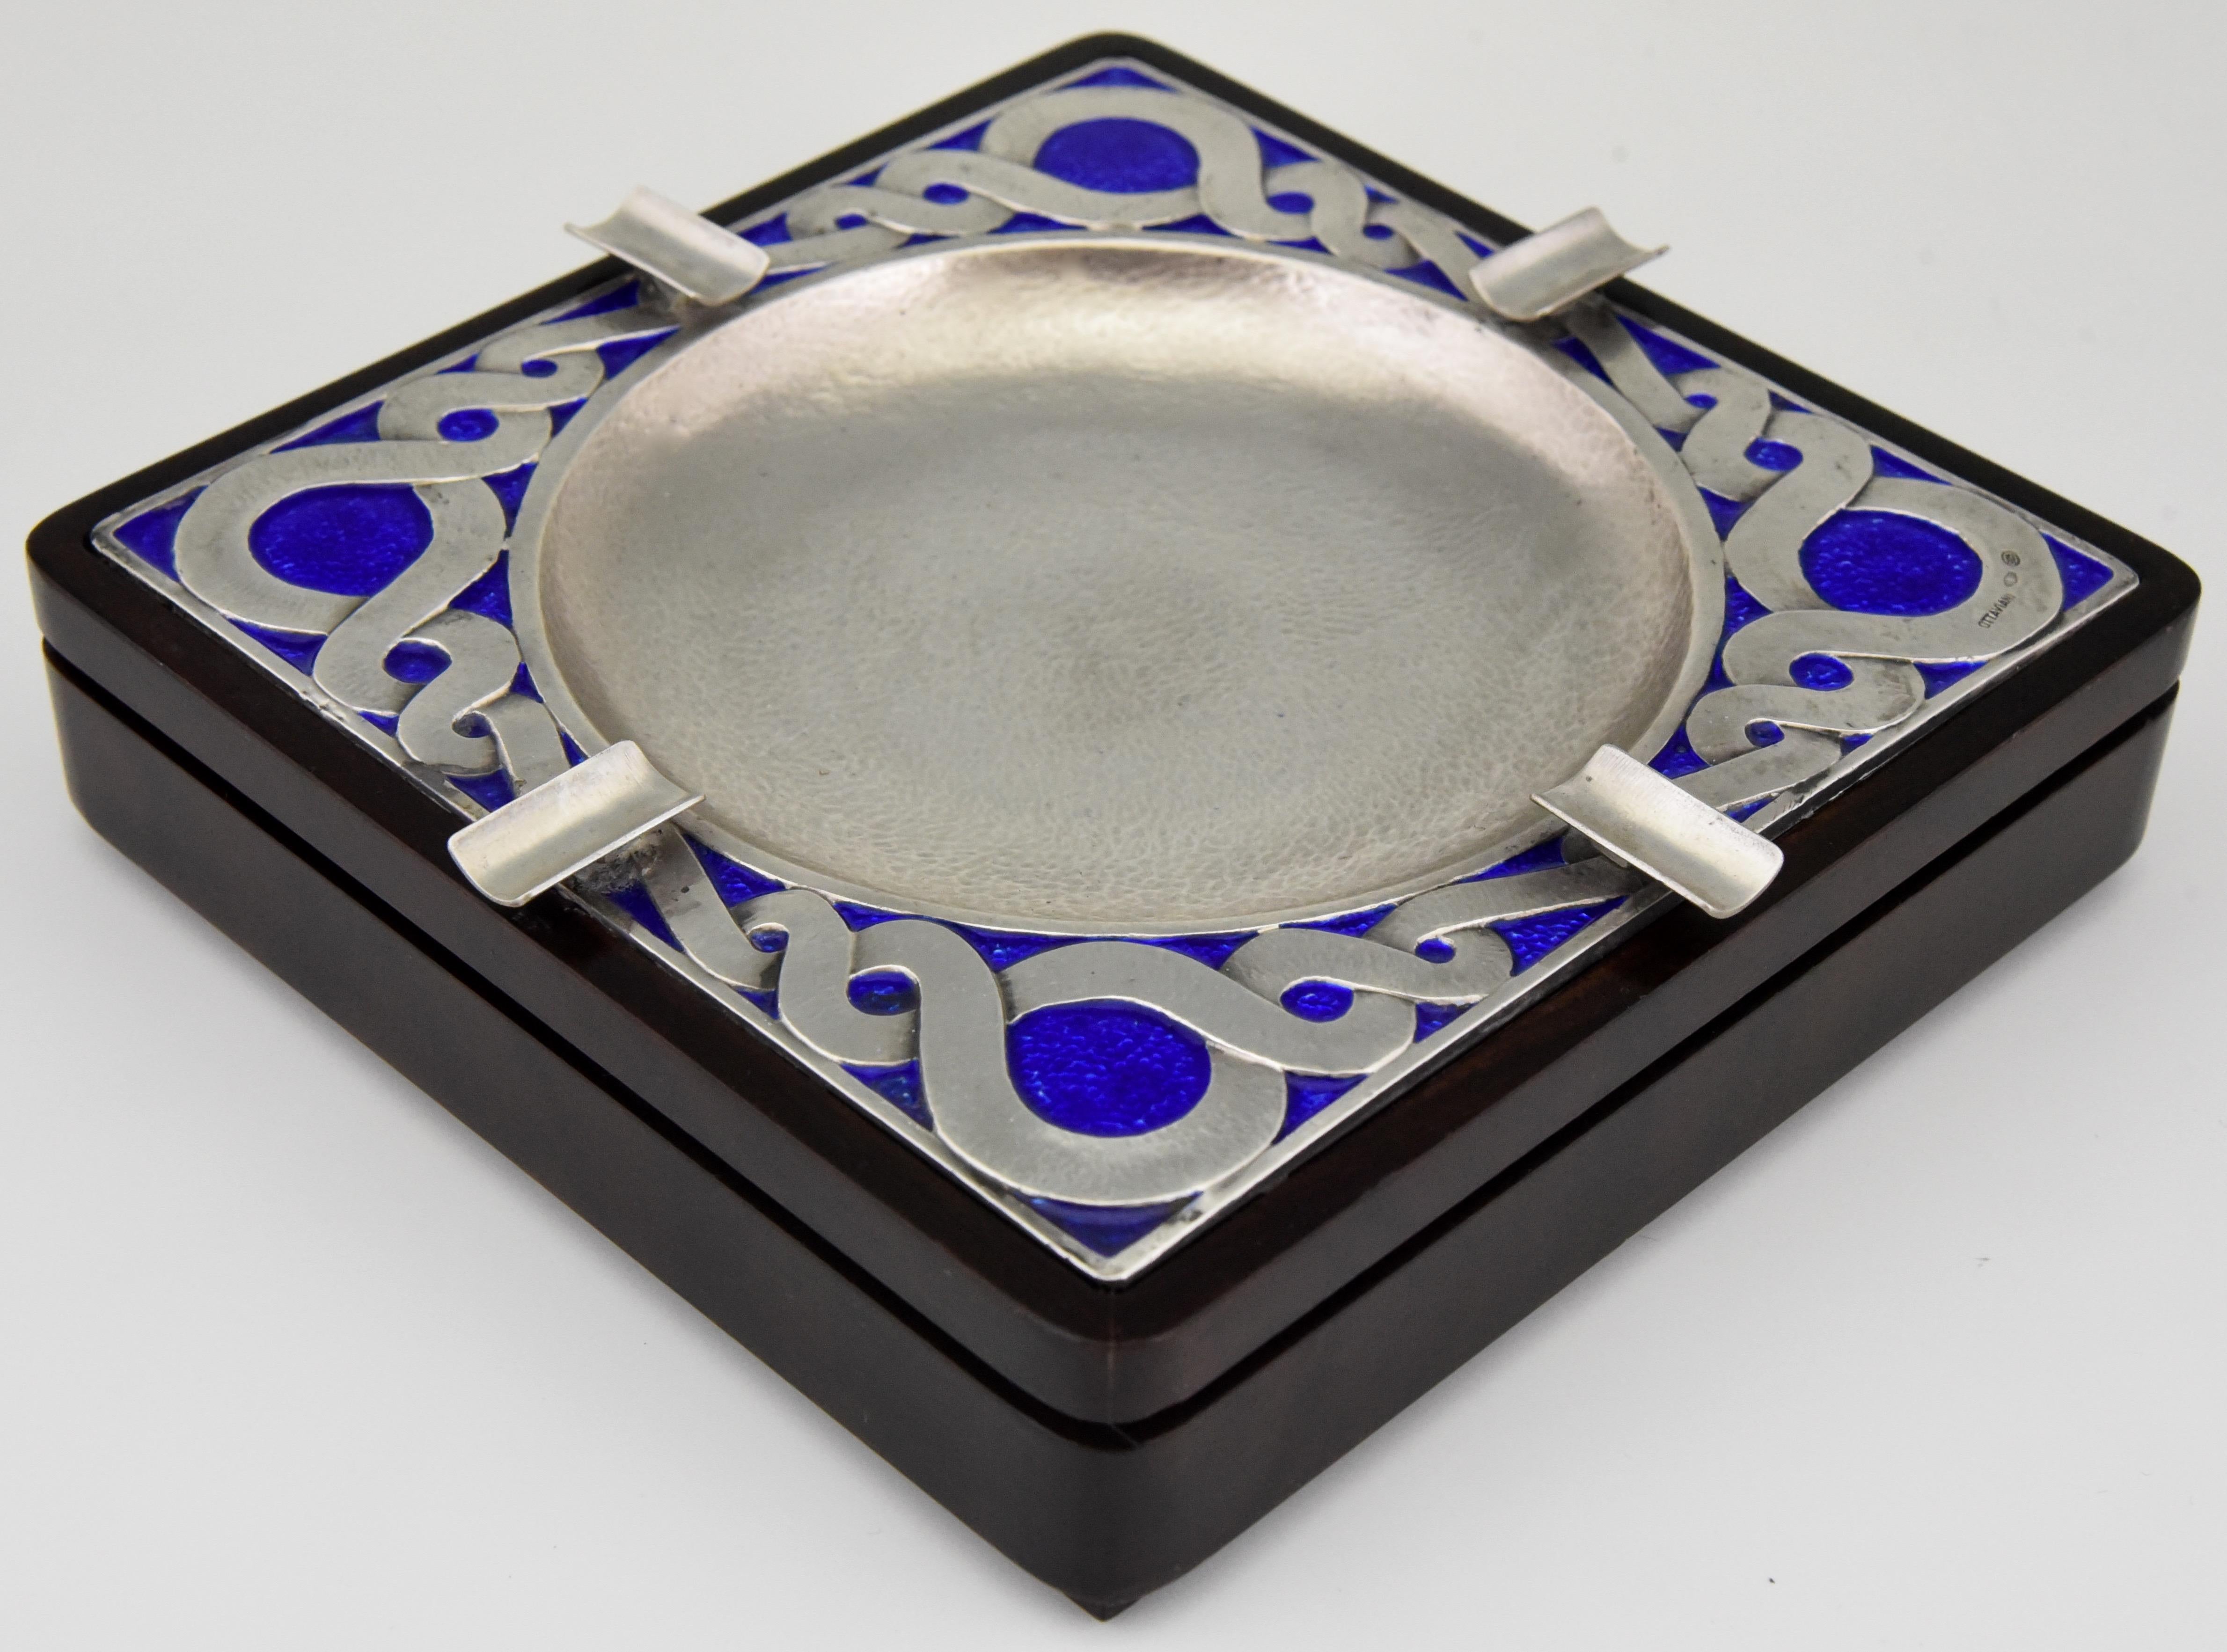 Stylish large midcentury large hammered silver table ashtray with blue enamel and wooden base.
By the Italian silversmith Otttaviani, circa 1970. 

Ottaviani (1945) is a jewelry and silver firm located in the small seaside town of Recanati,